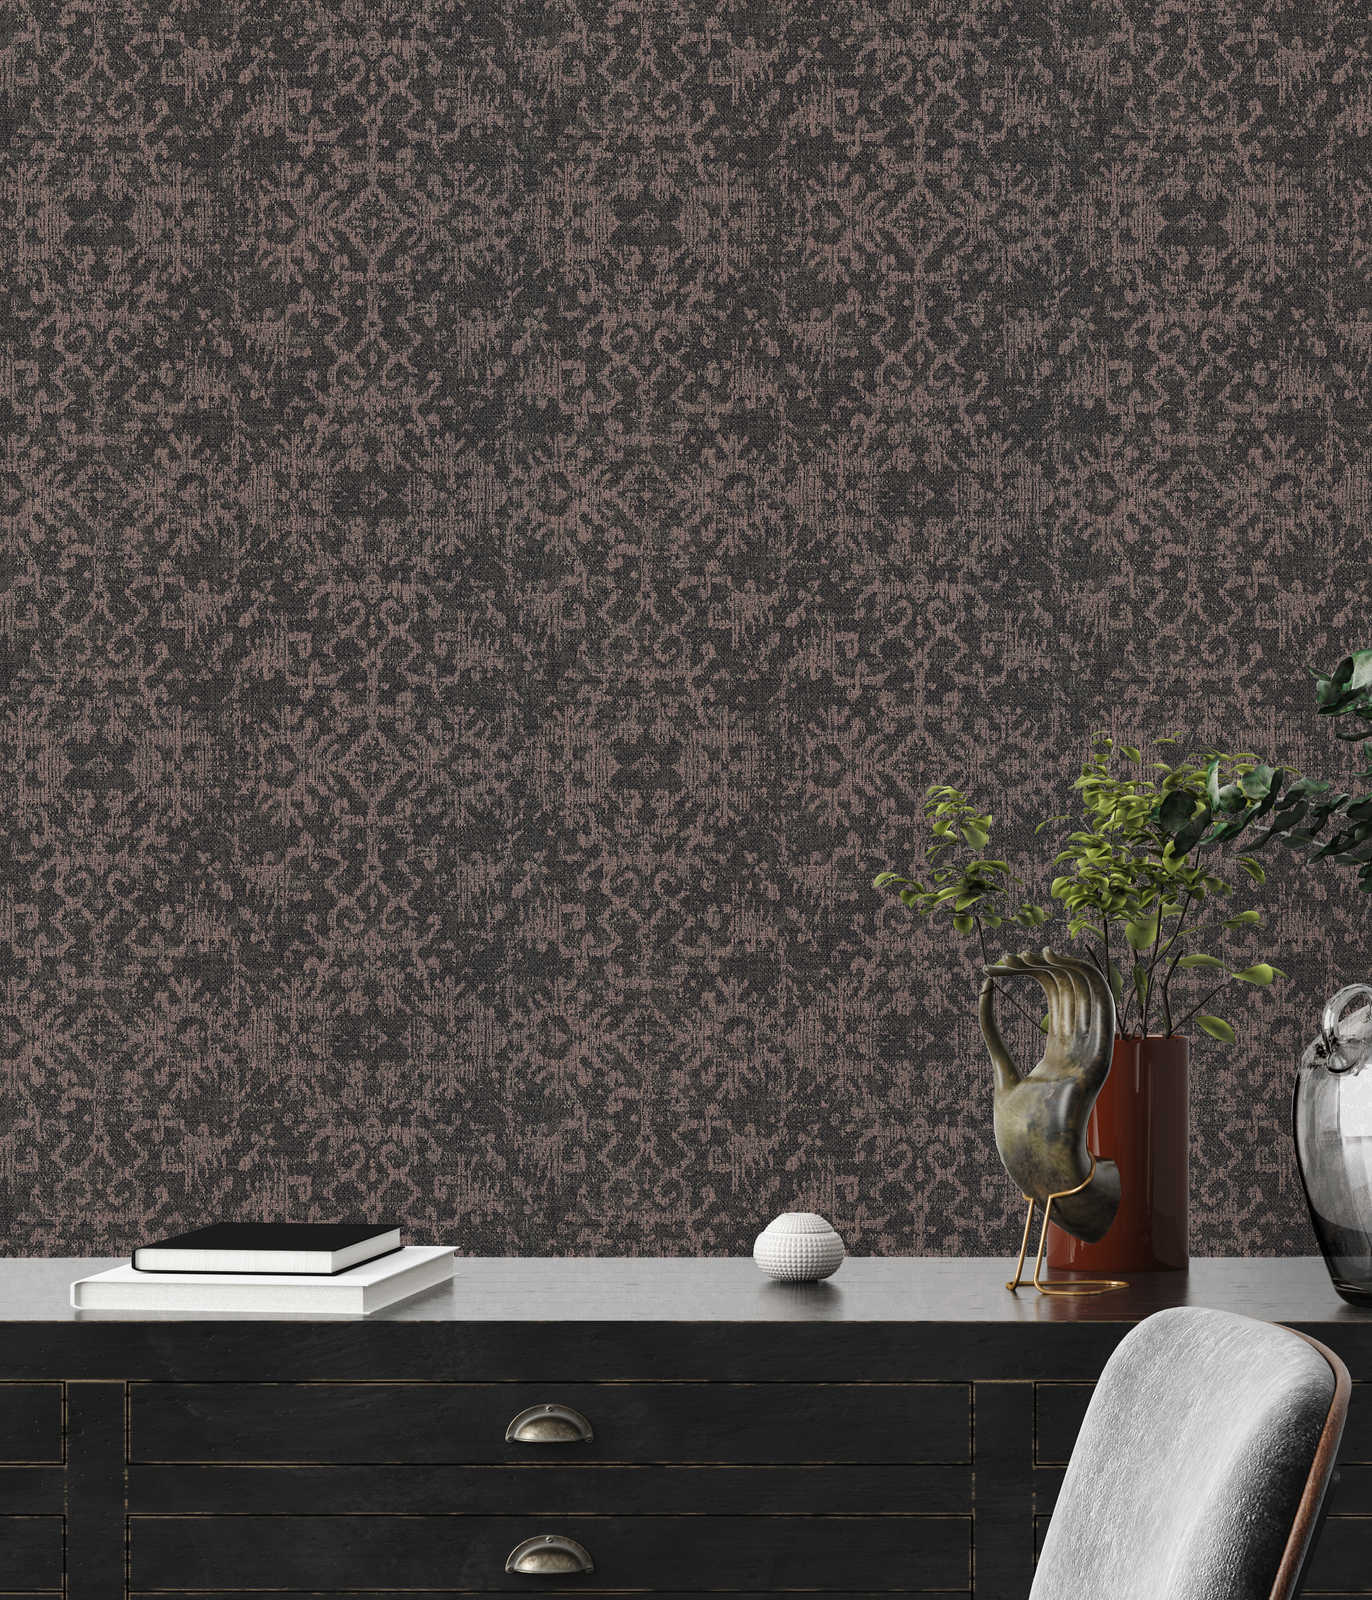             Black wallpaper with textile look and carpet design
        